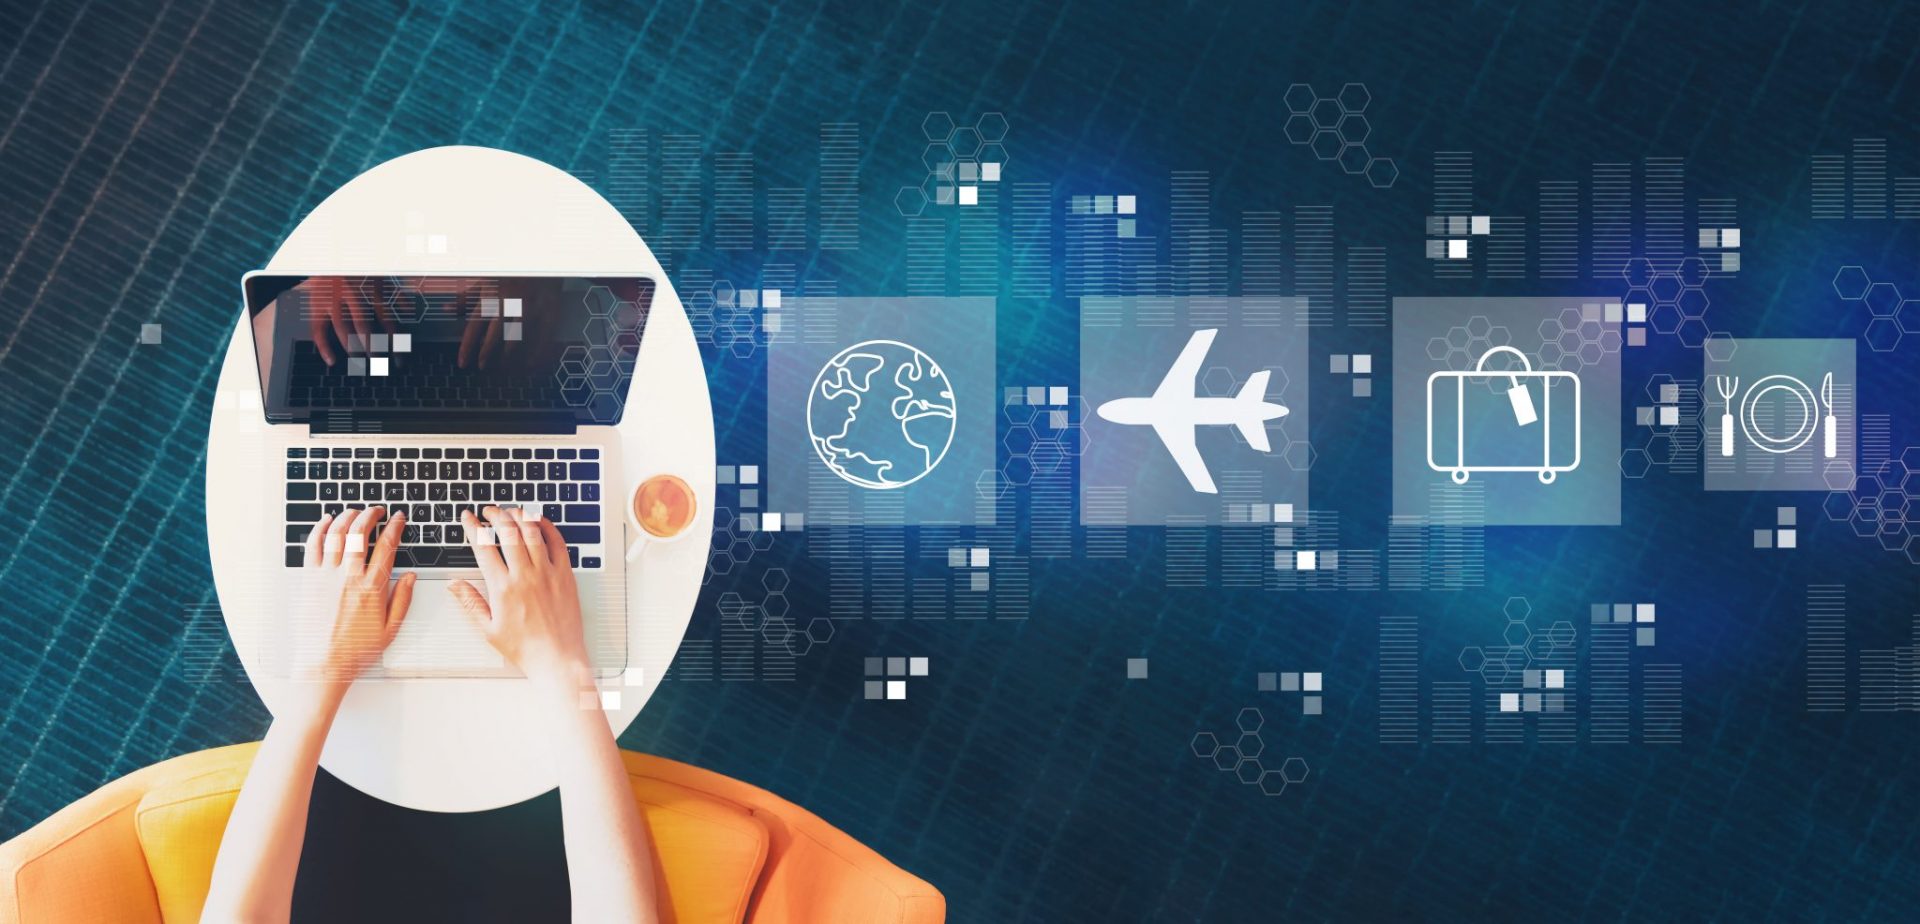 Airplane travel theme with person using a laptop